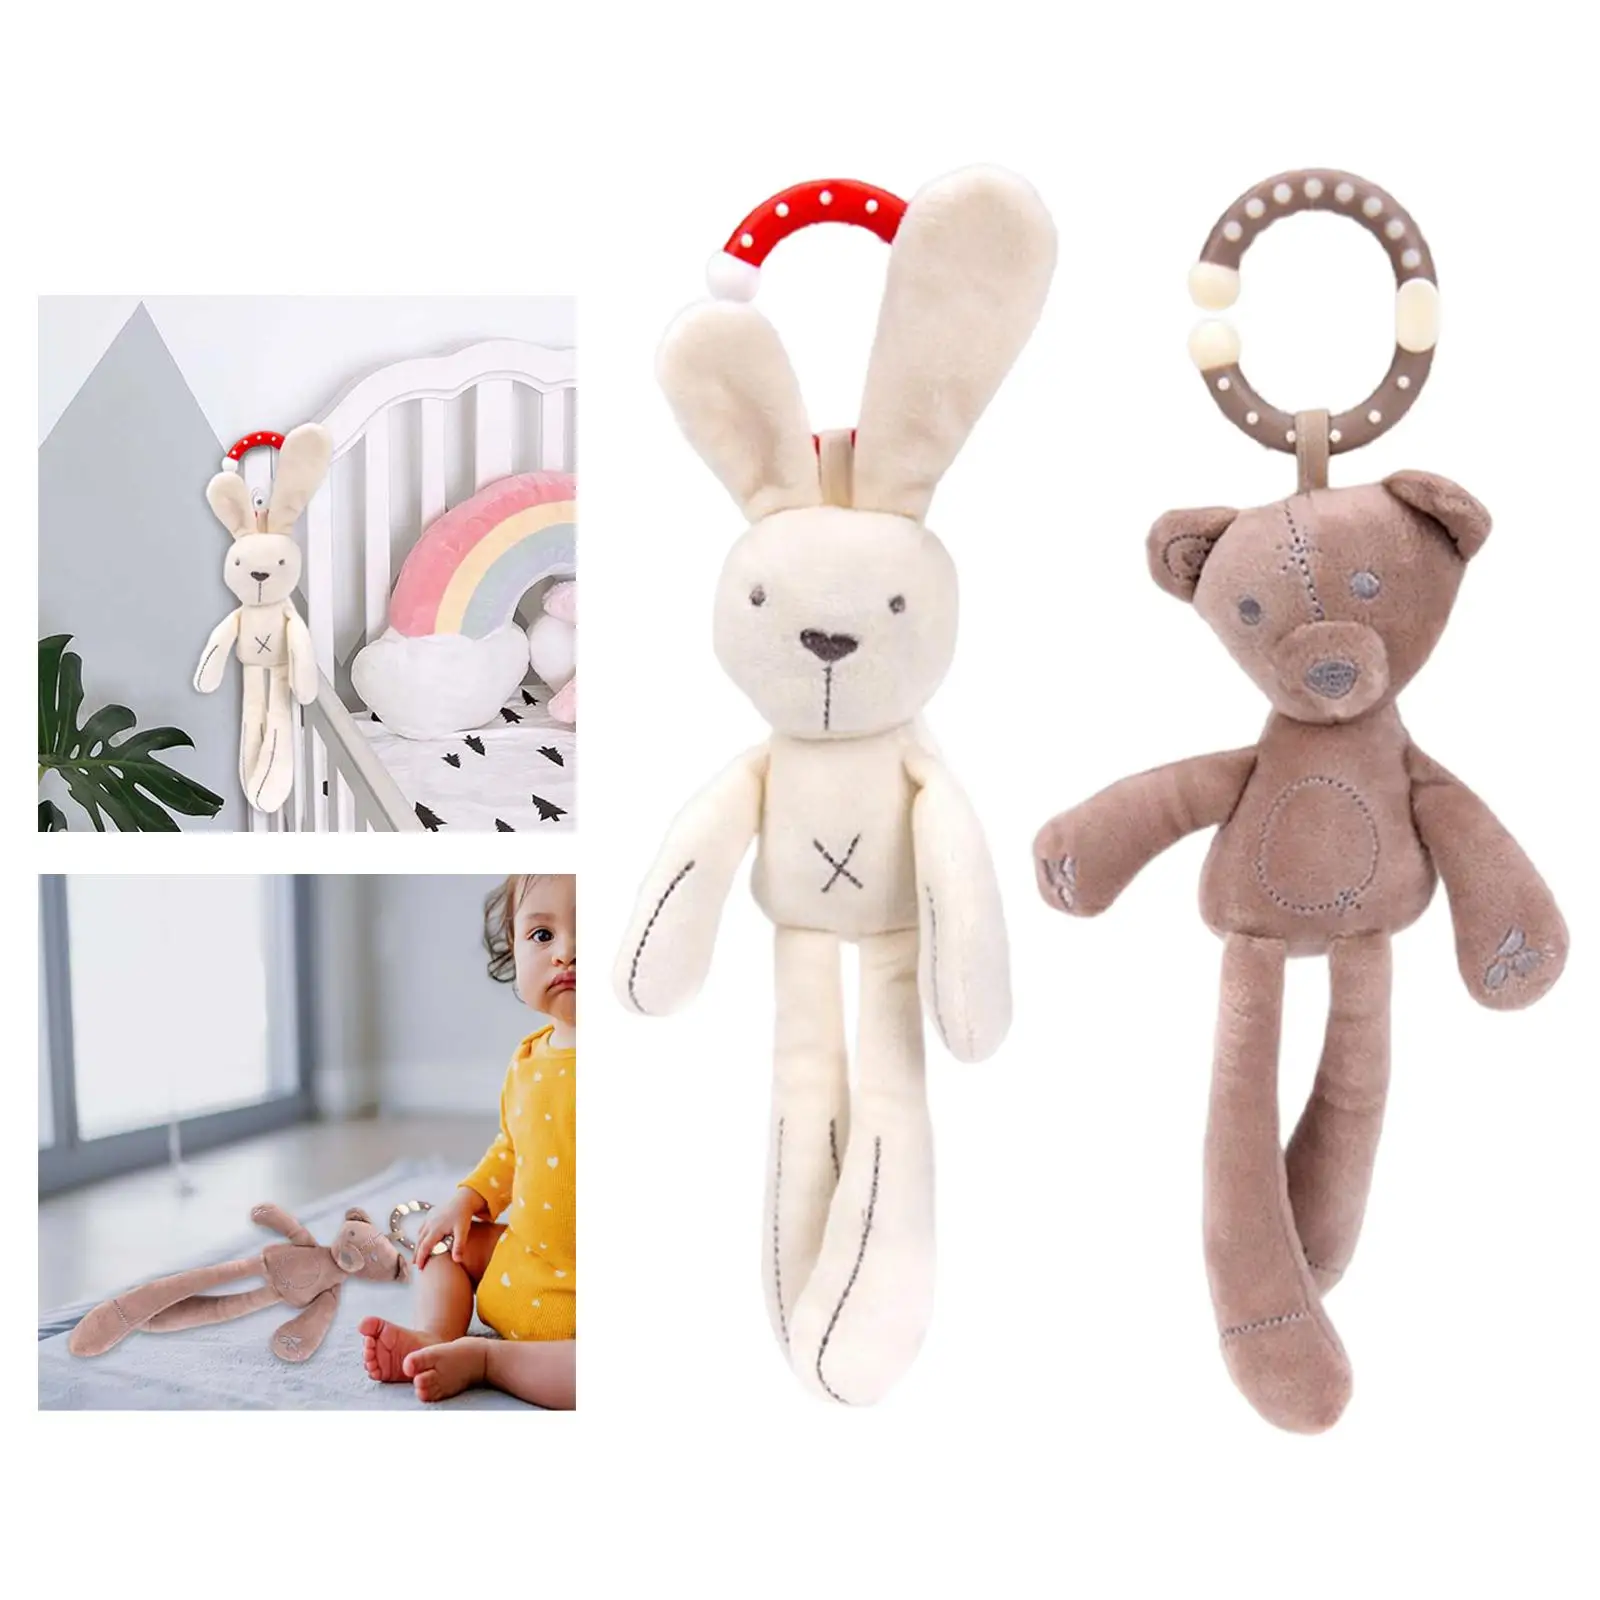 Plush Animals Toys Stuffed Animal Baby Rattle for Birthday Gifts